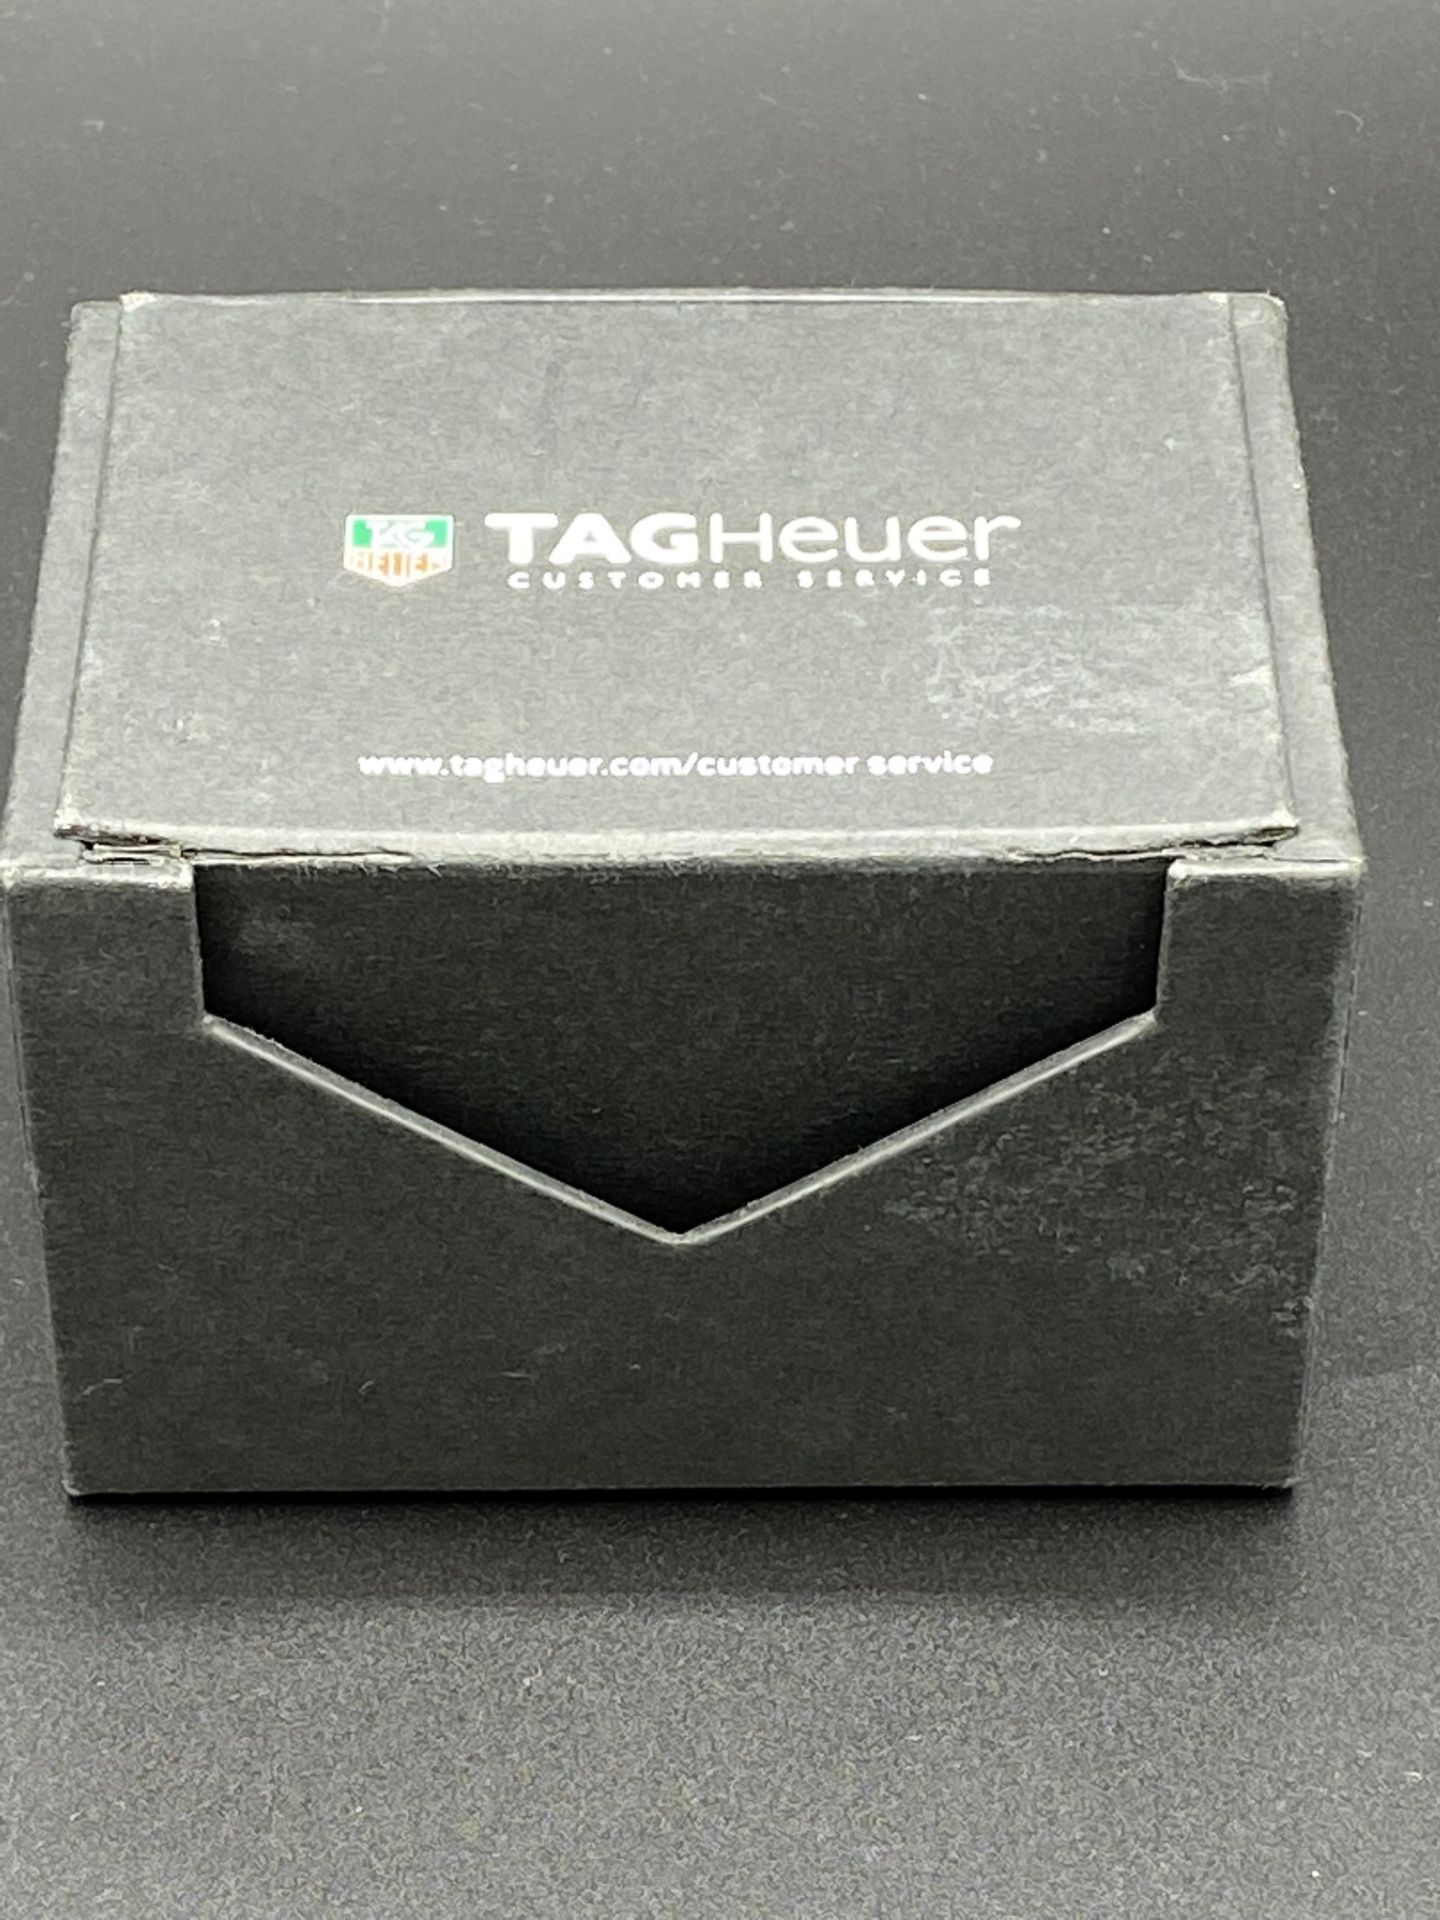 Tag Heuer stainless steel wrist watch - Image 6 of 7